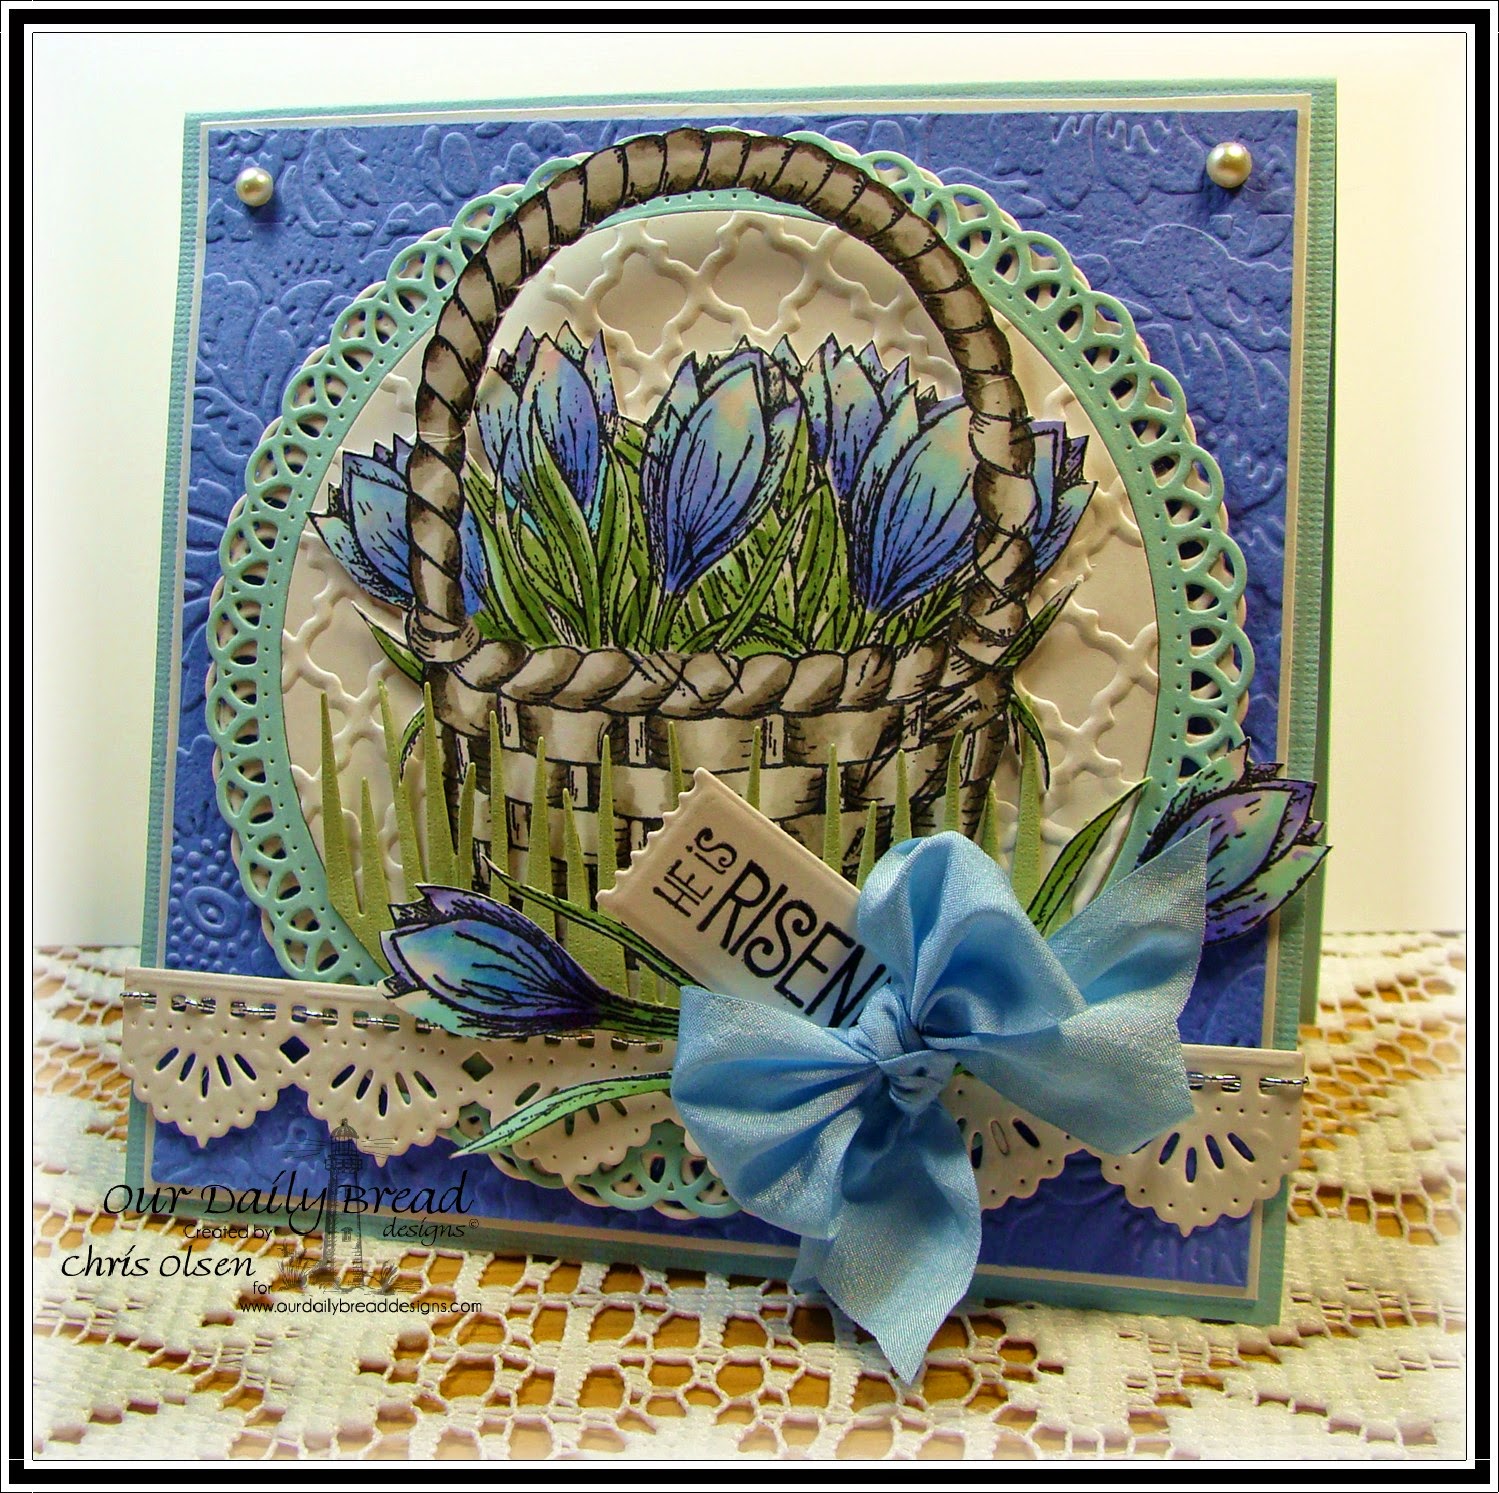 Our Daily Bread Designs, The Lord is Risen, Basket of Blessings, Happy Resurrection Day, Mini Tag dies, Beautiful Borders die, grass dies, designed by Chris Olsen